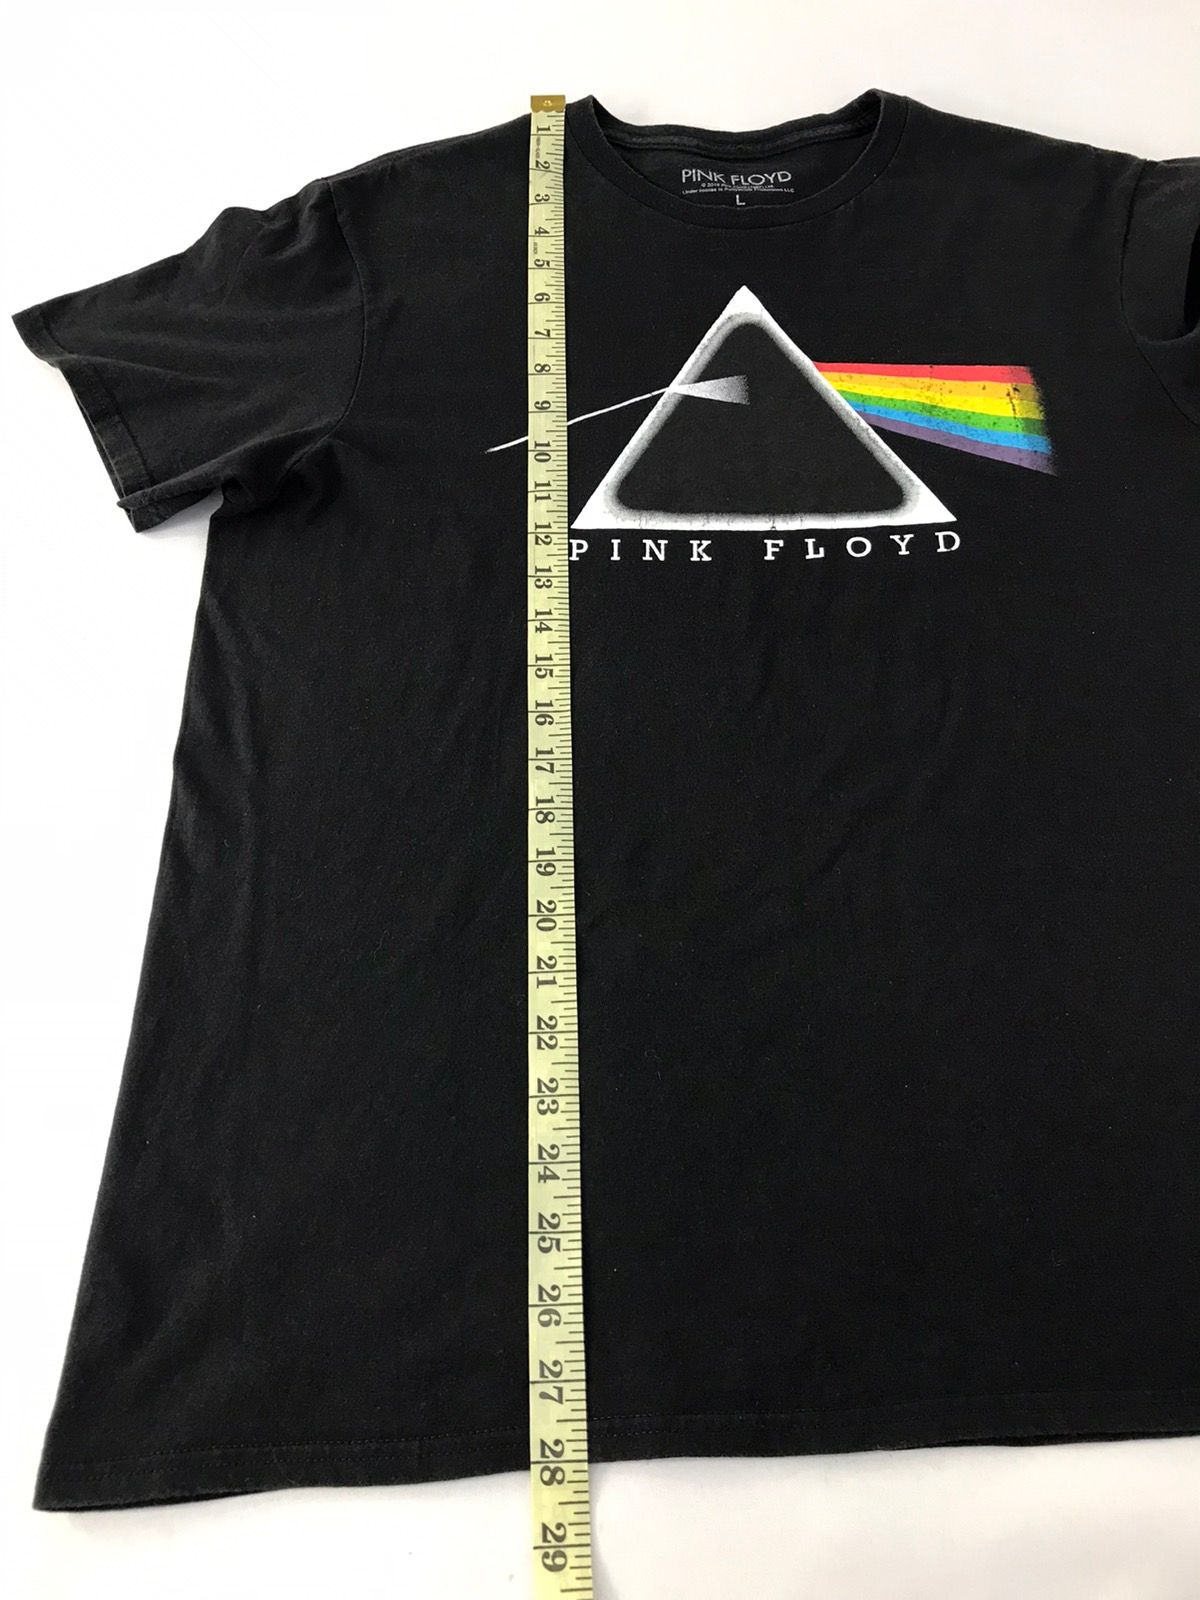 Pink Floyd Rock Band Pink Floyd Album The Dark Side Of The Moon Tee Size US L / EU 52-54 / 3 - 7 Preview